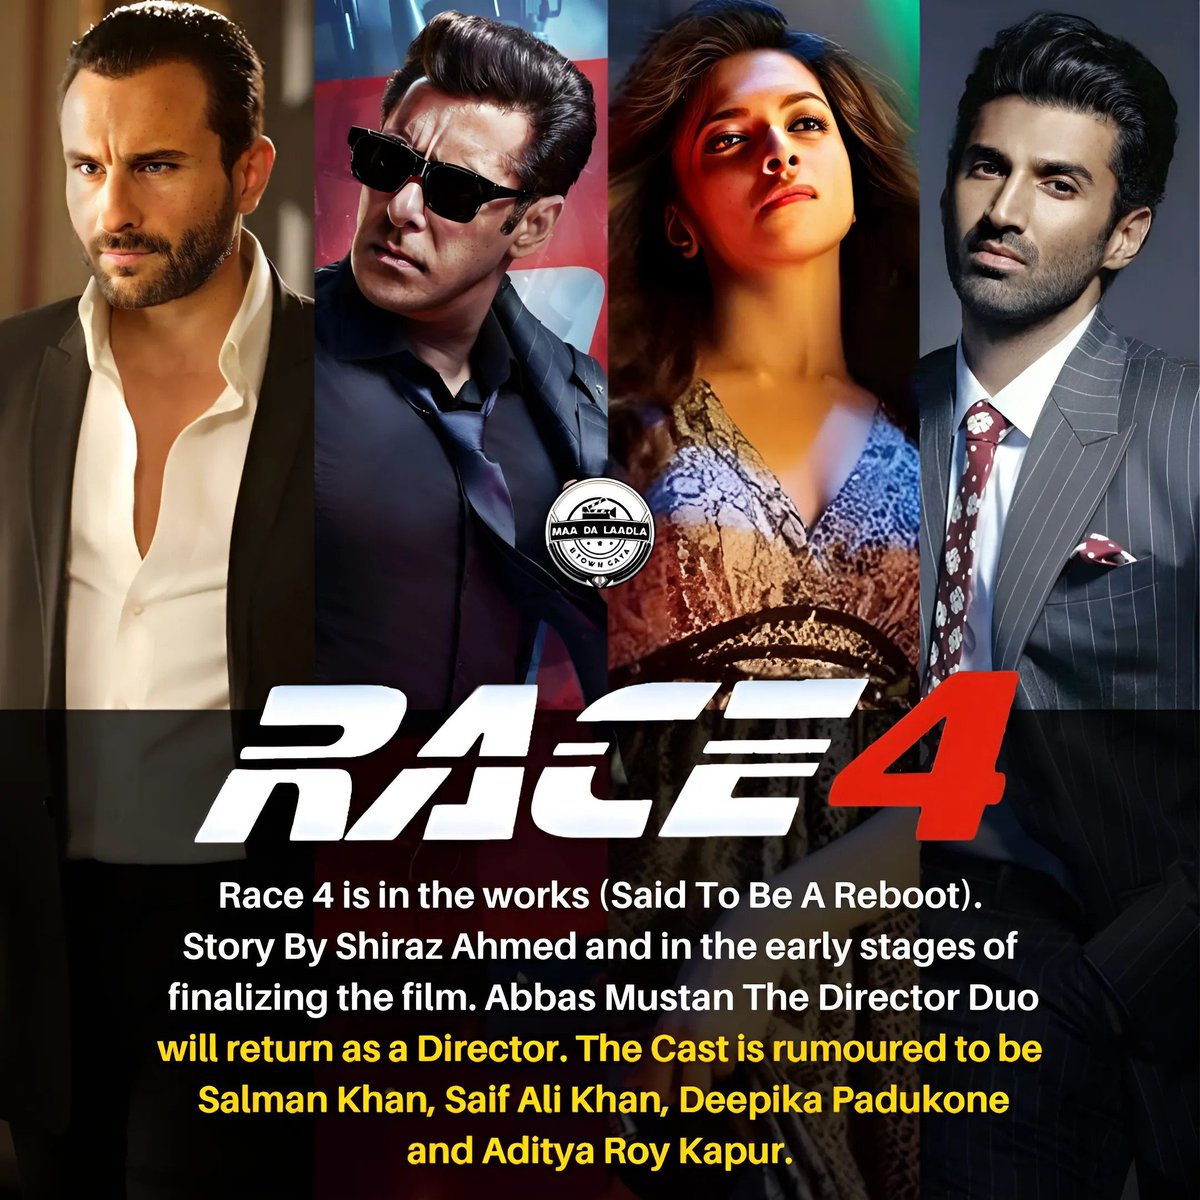 #Race4 is in the works (Said To Be A Reboot). Story By #ShirazAhmed and in the early stages of finalizing the film. #AbbasMustan The Director Duo will return as a Director. The Cast is rumoured to be #SalmanKhan, #SaifAliKhan, #DeepikaPadukone and #AdityaRoyKapur. 😎🔥